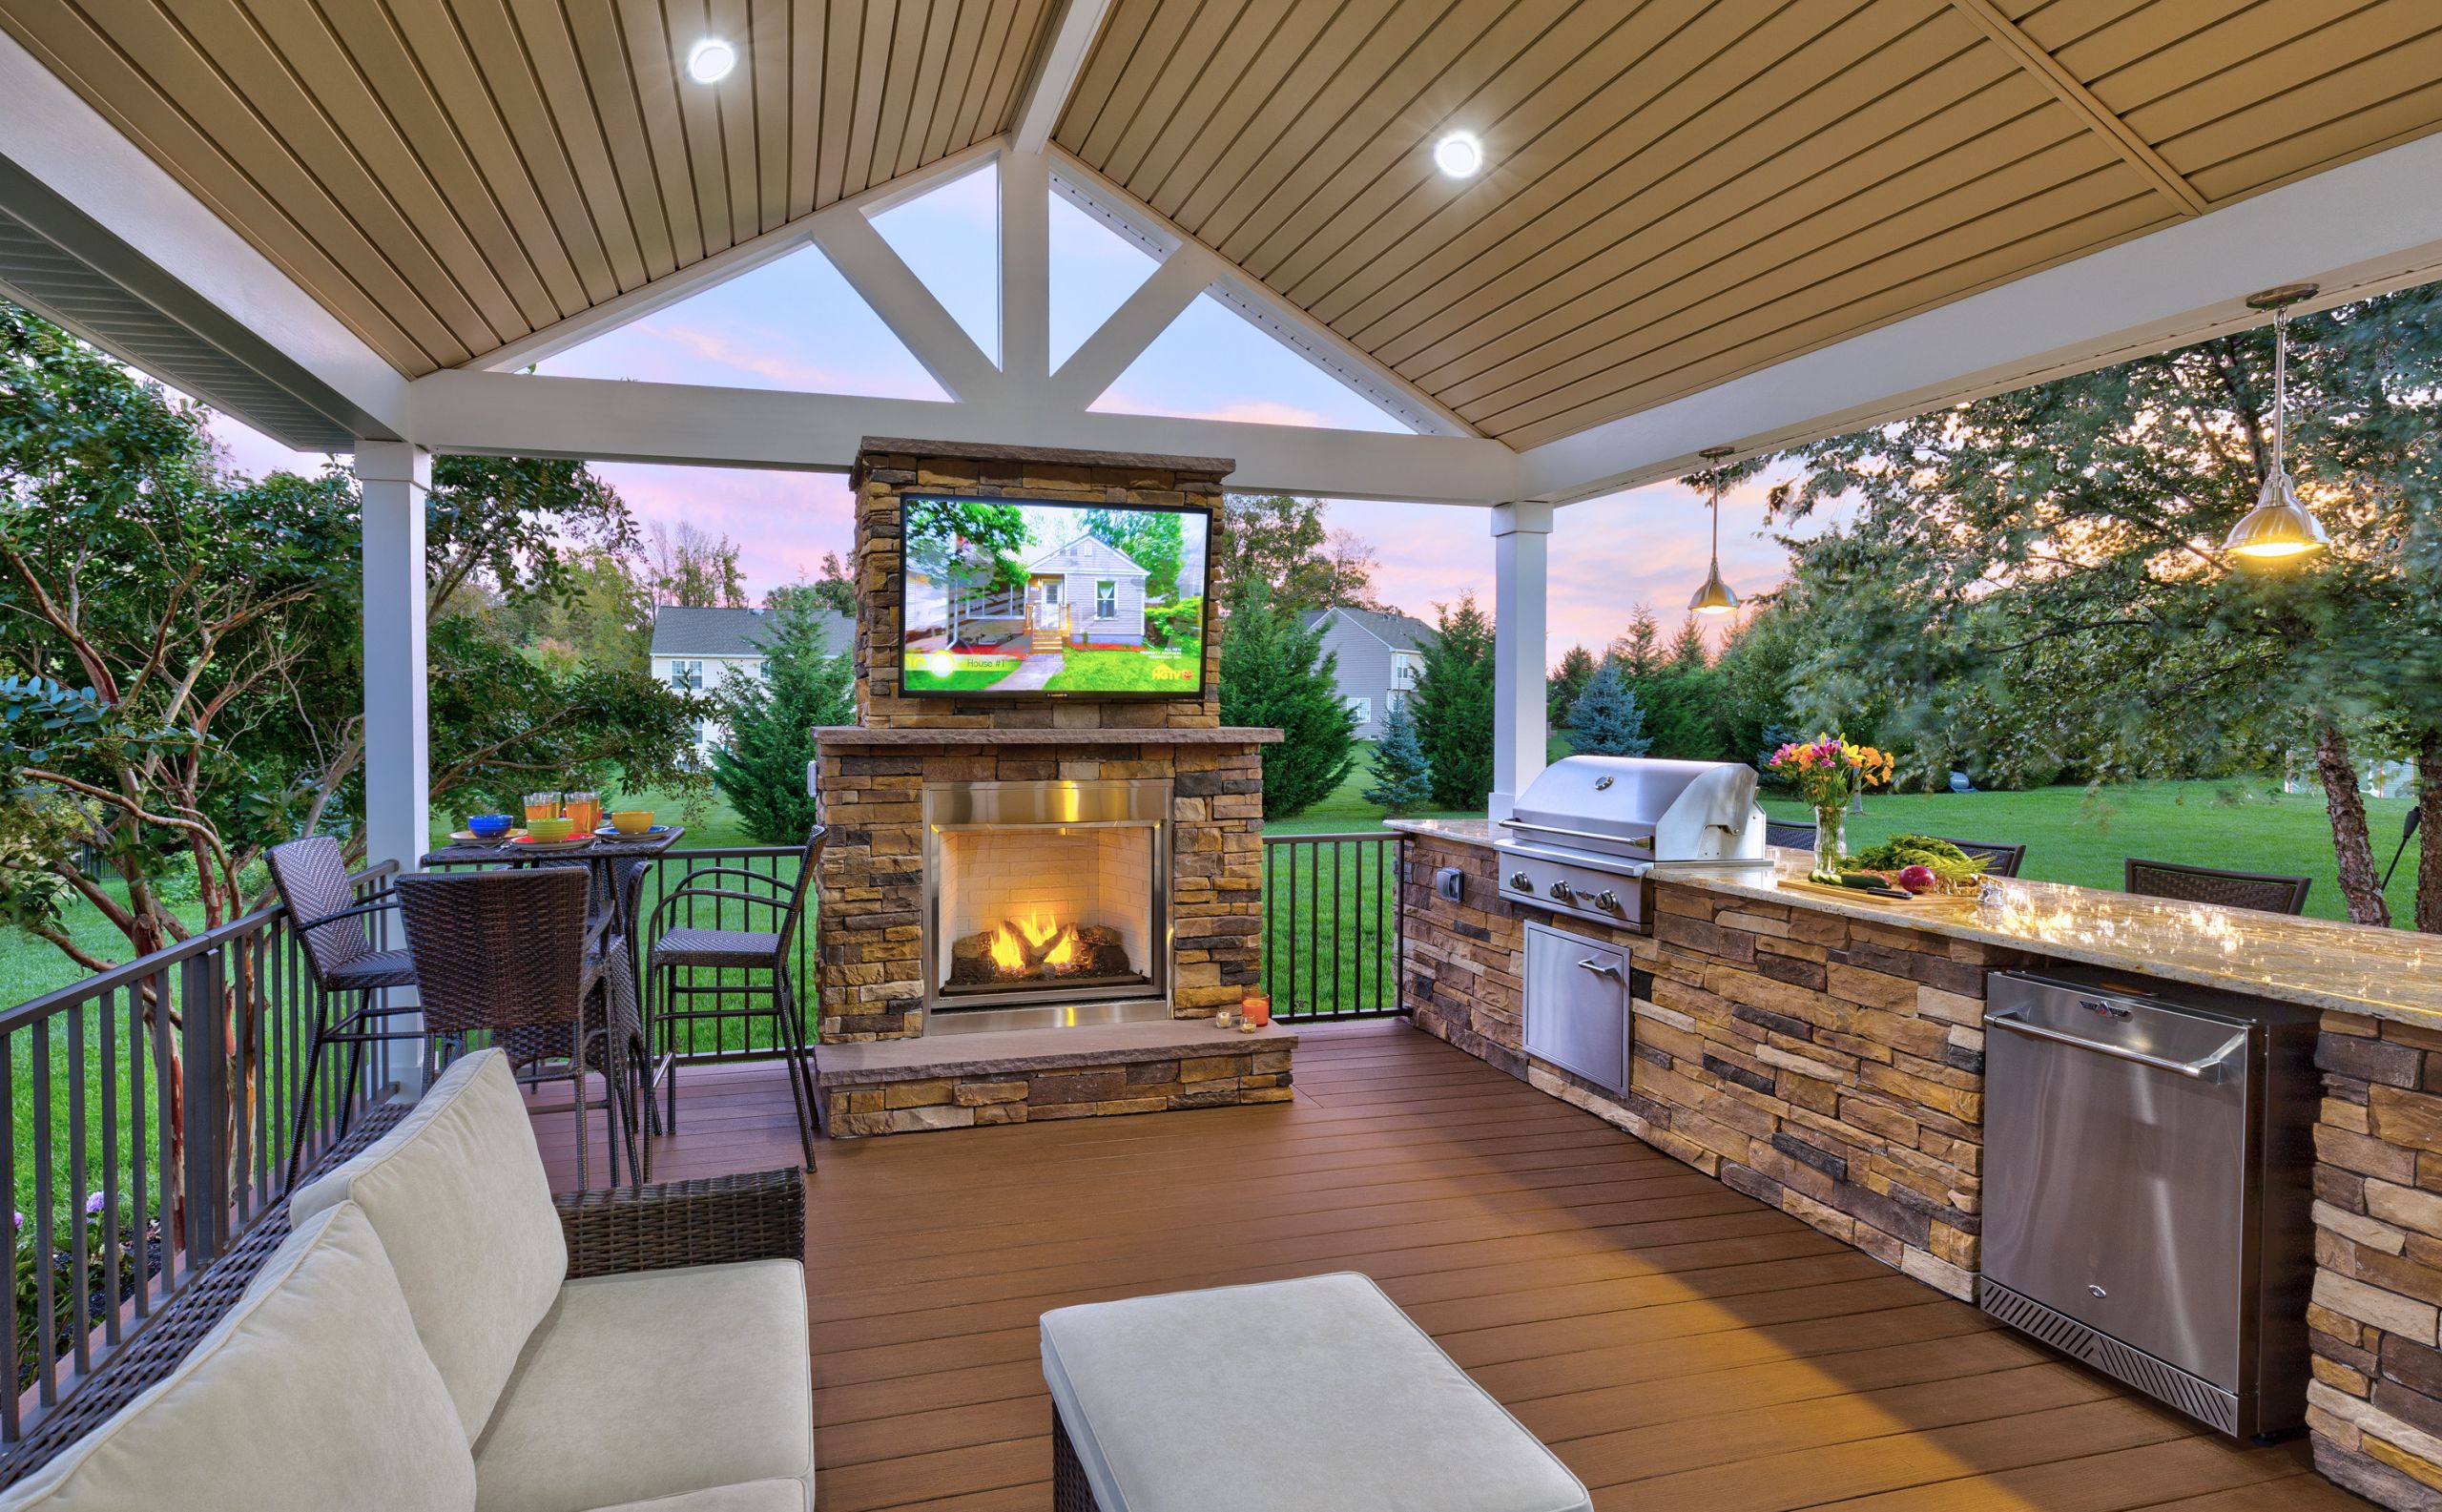 Outdoor Kitchen And Fireplace Ideas
 outdoor kitchen fireplace television or sound system